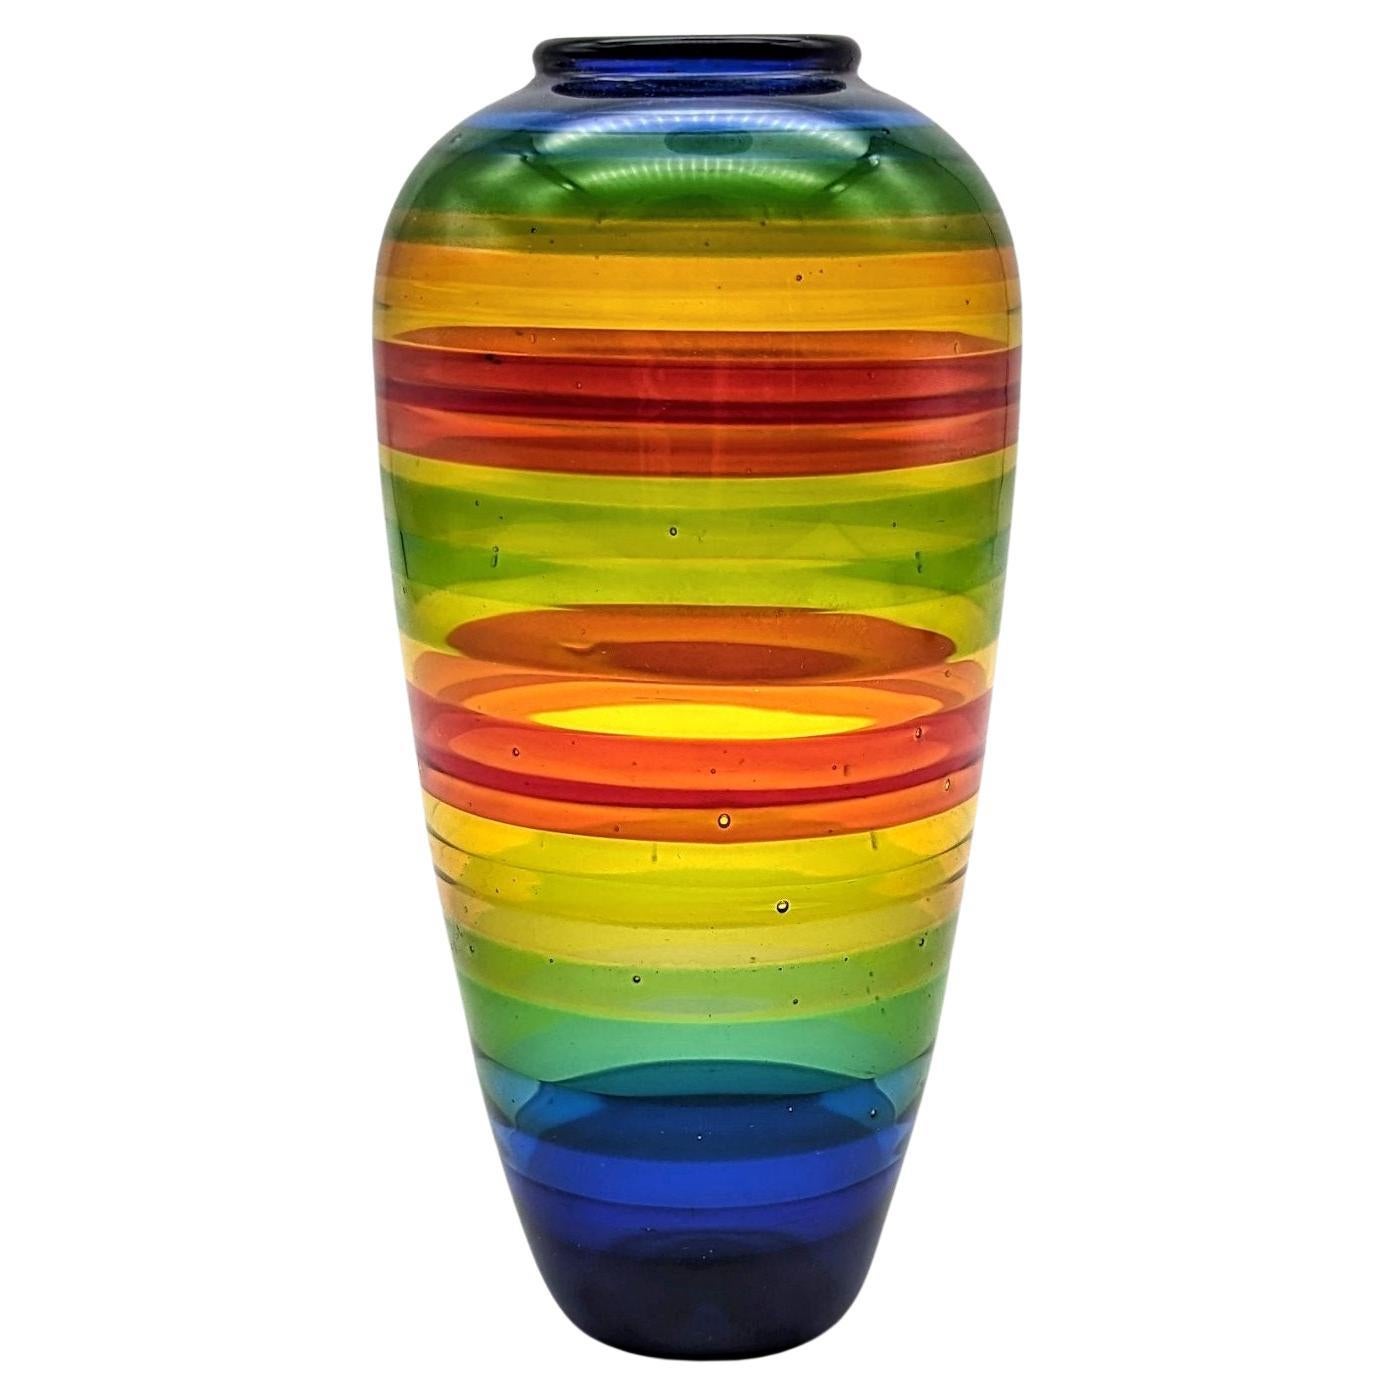 A colorful flamework vessel by Kurt Wallstab from 1987 For Sale